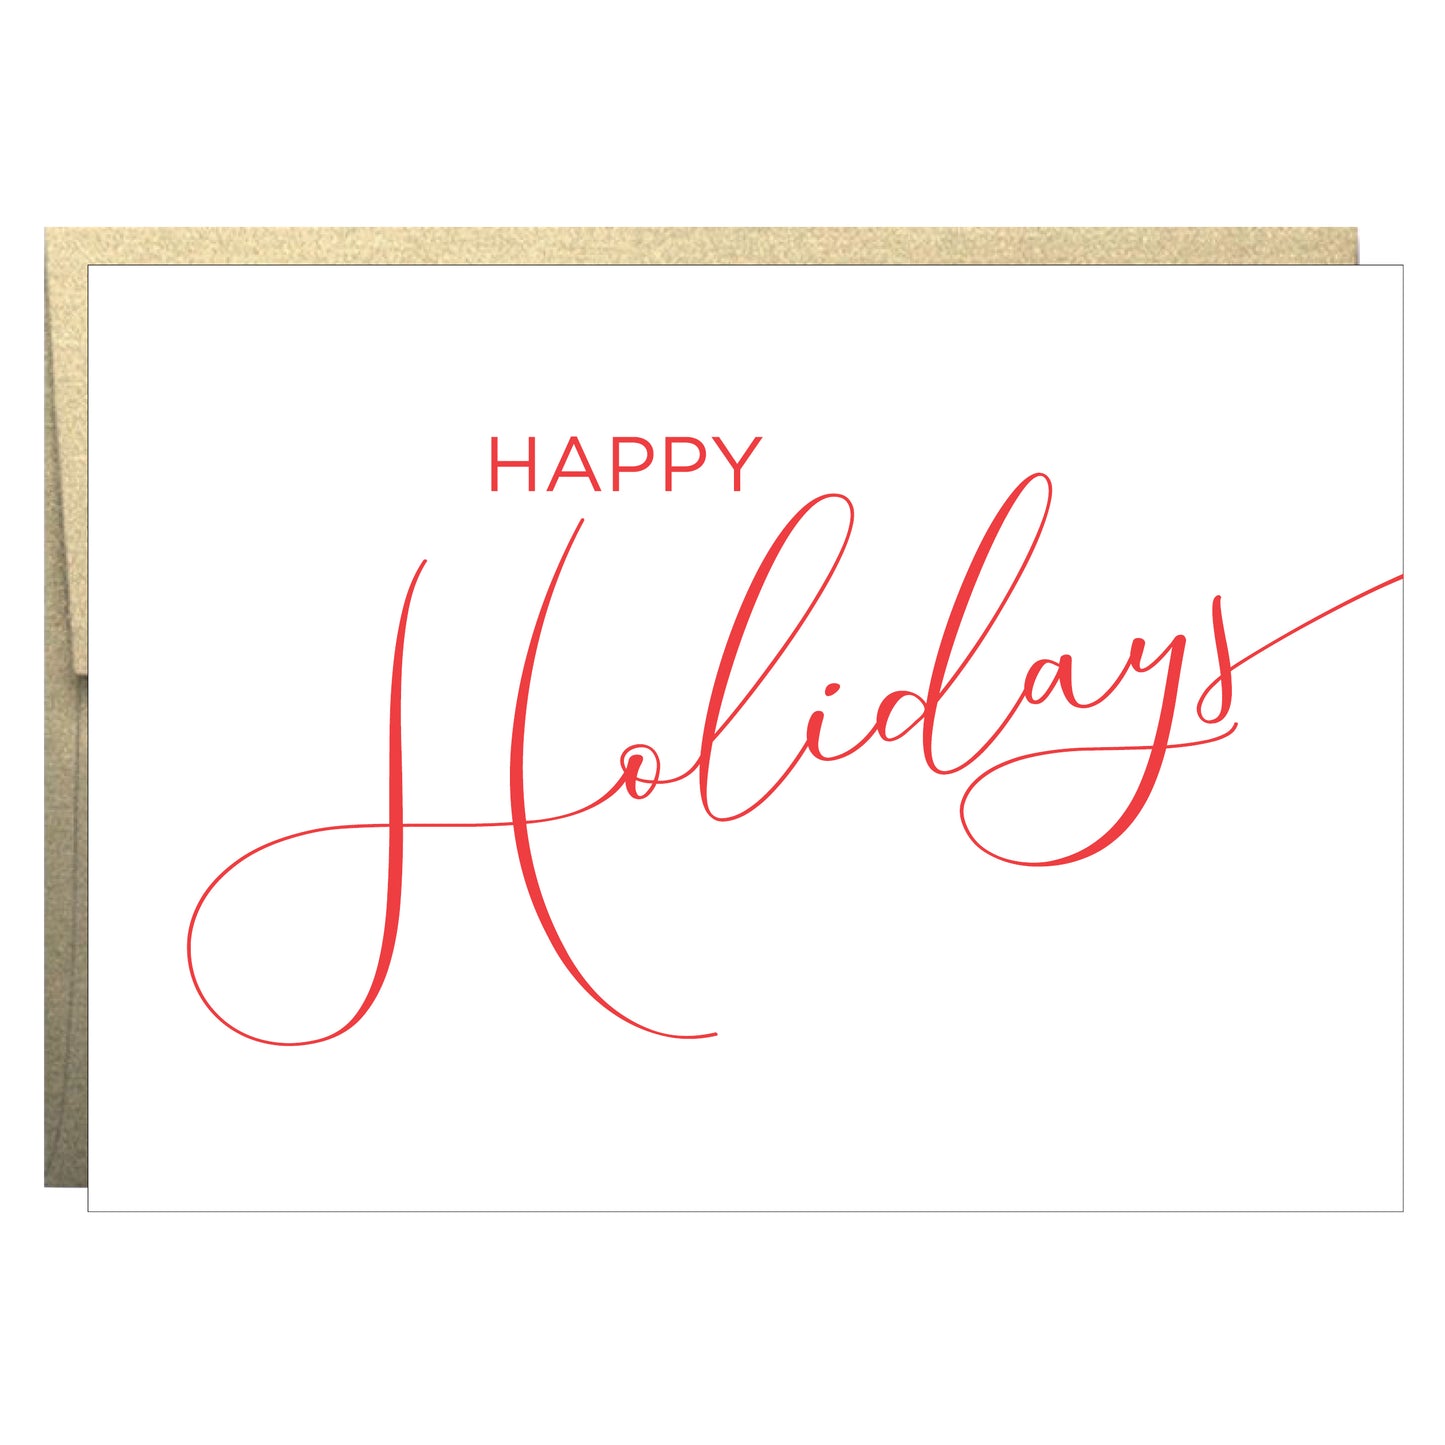 Happy Holidays Greeting Card - 8 pack